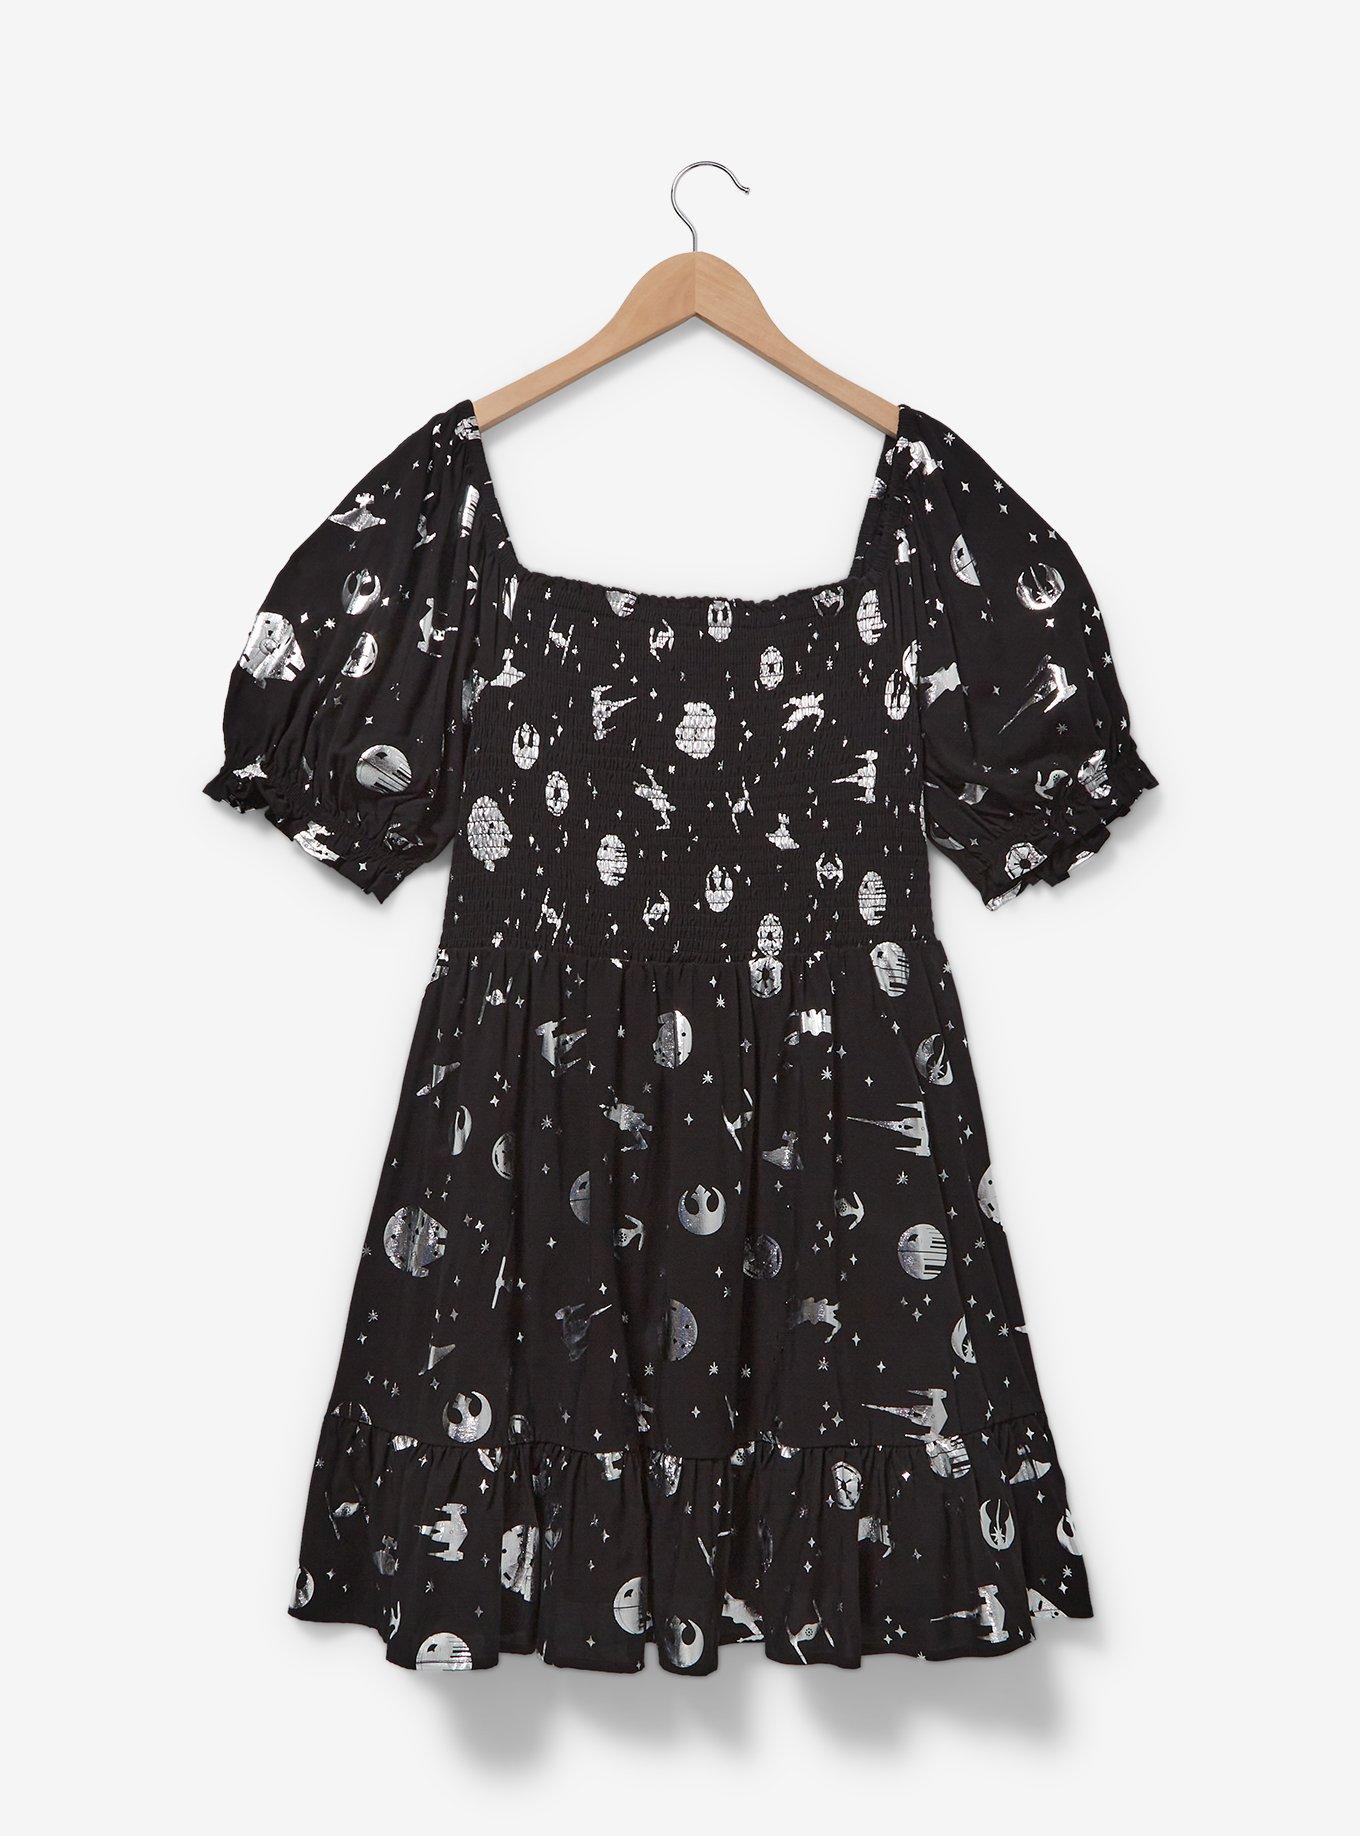 Her Universe Star Wars Silver Icons Allover Print Plus Size Smock Dress - BoxLunch Exclusive, BLACK, hi-res